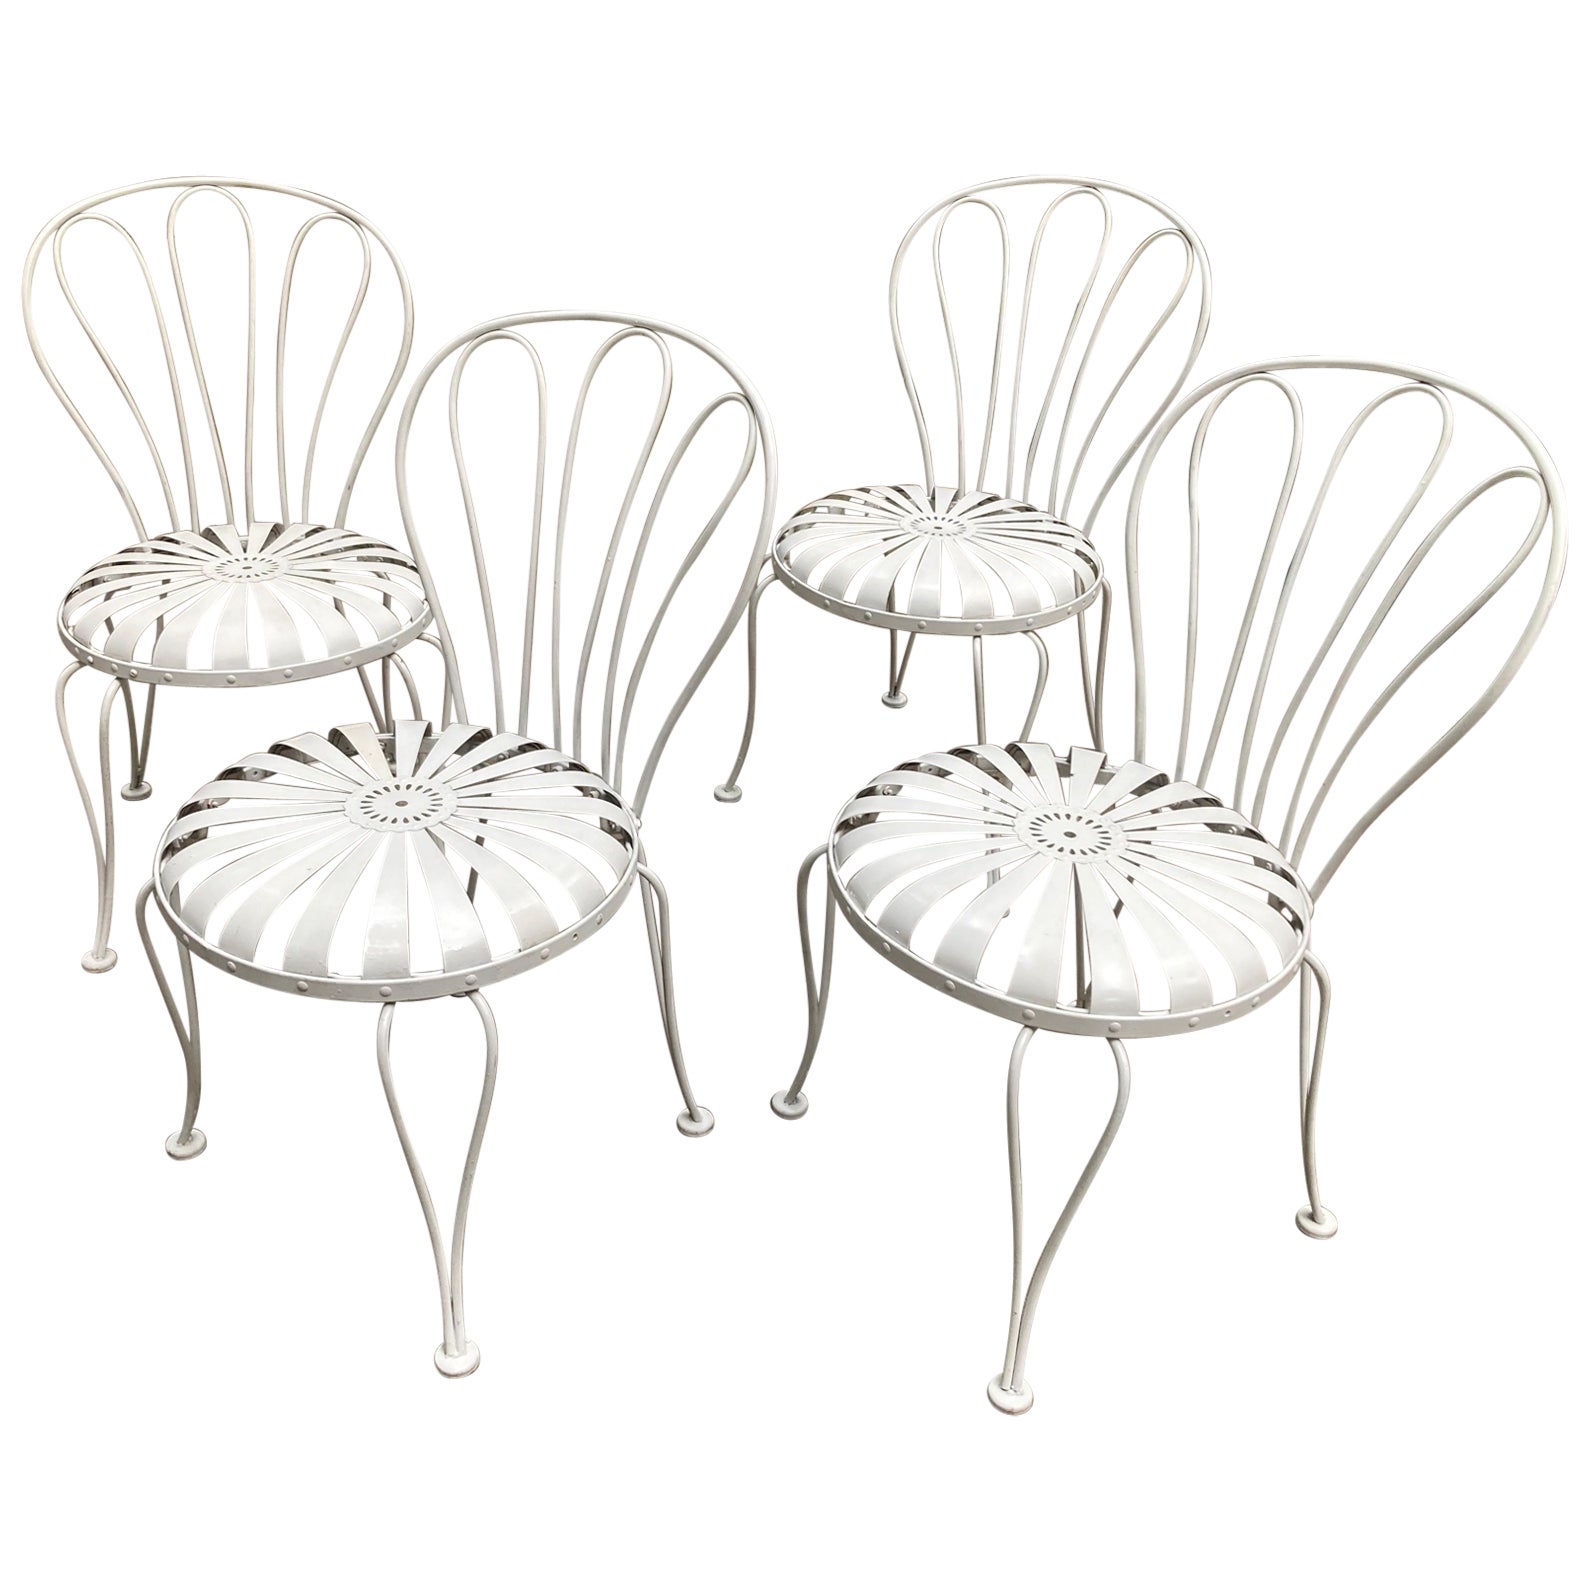 francois carre garden chairs -
set of 4 For Sale